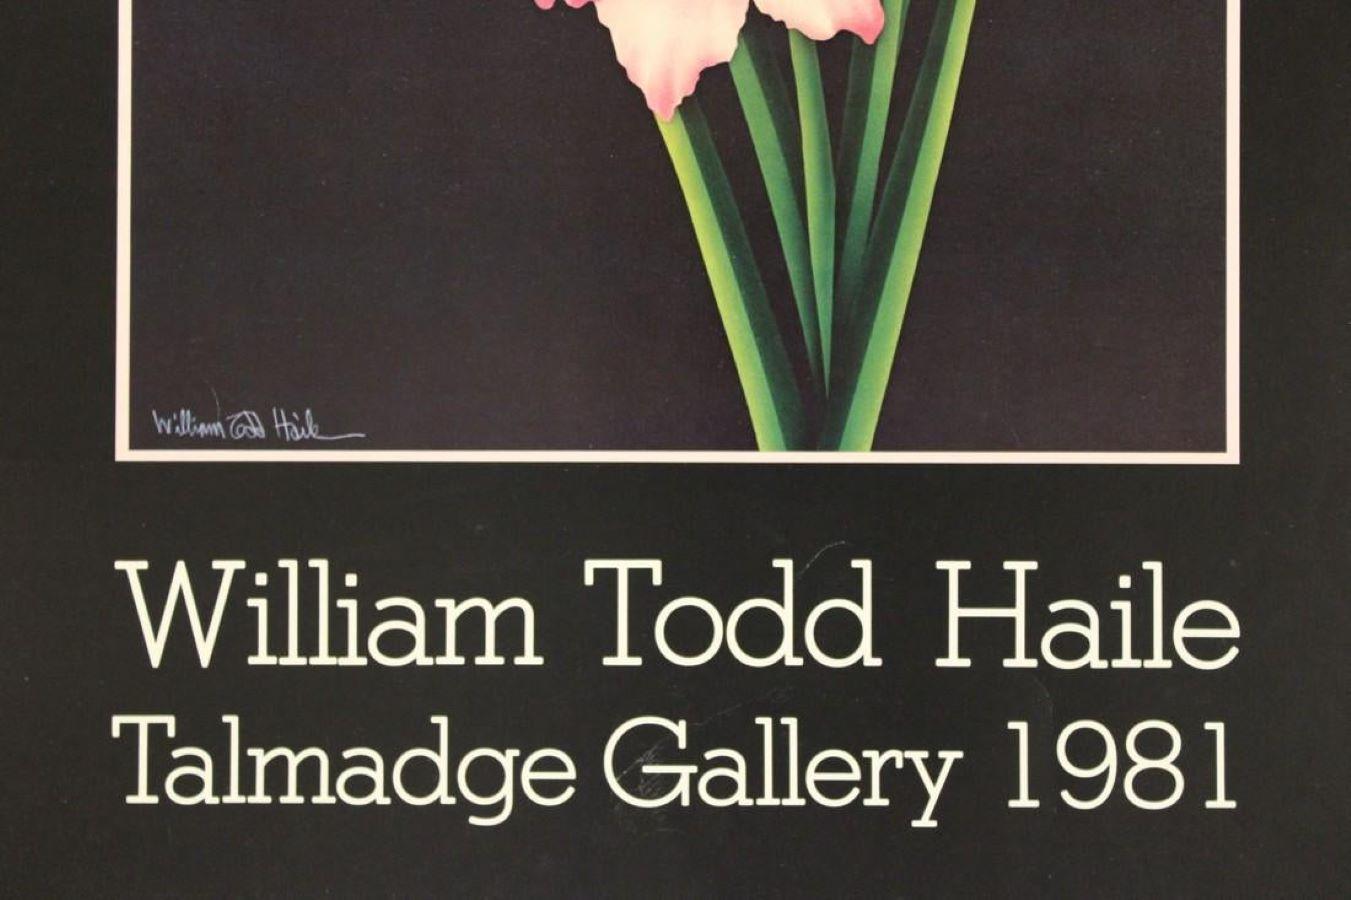 Poster-Talmadge Gallery, 1981 - Print by William Todd Haile